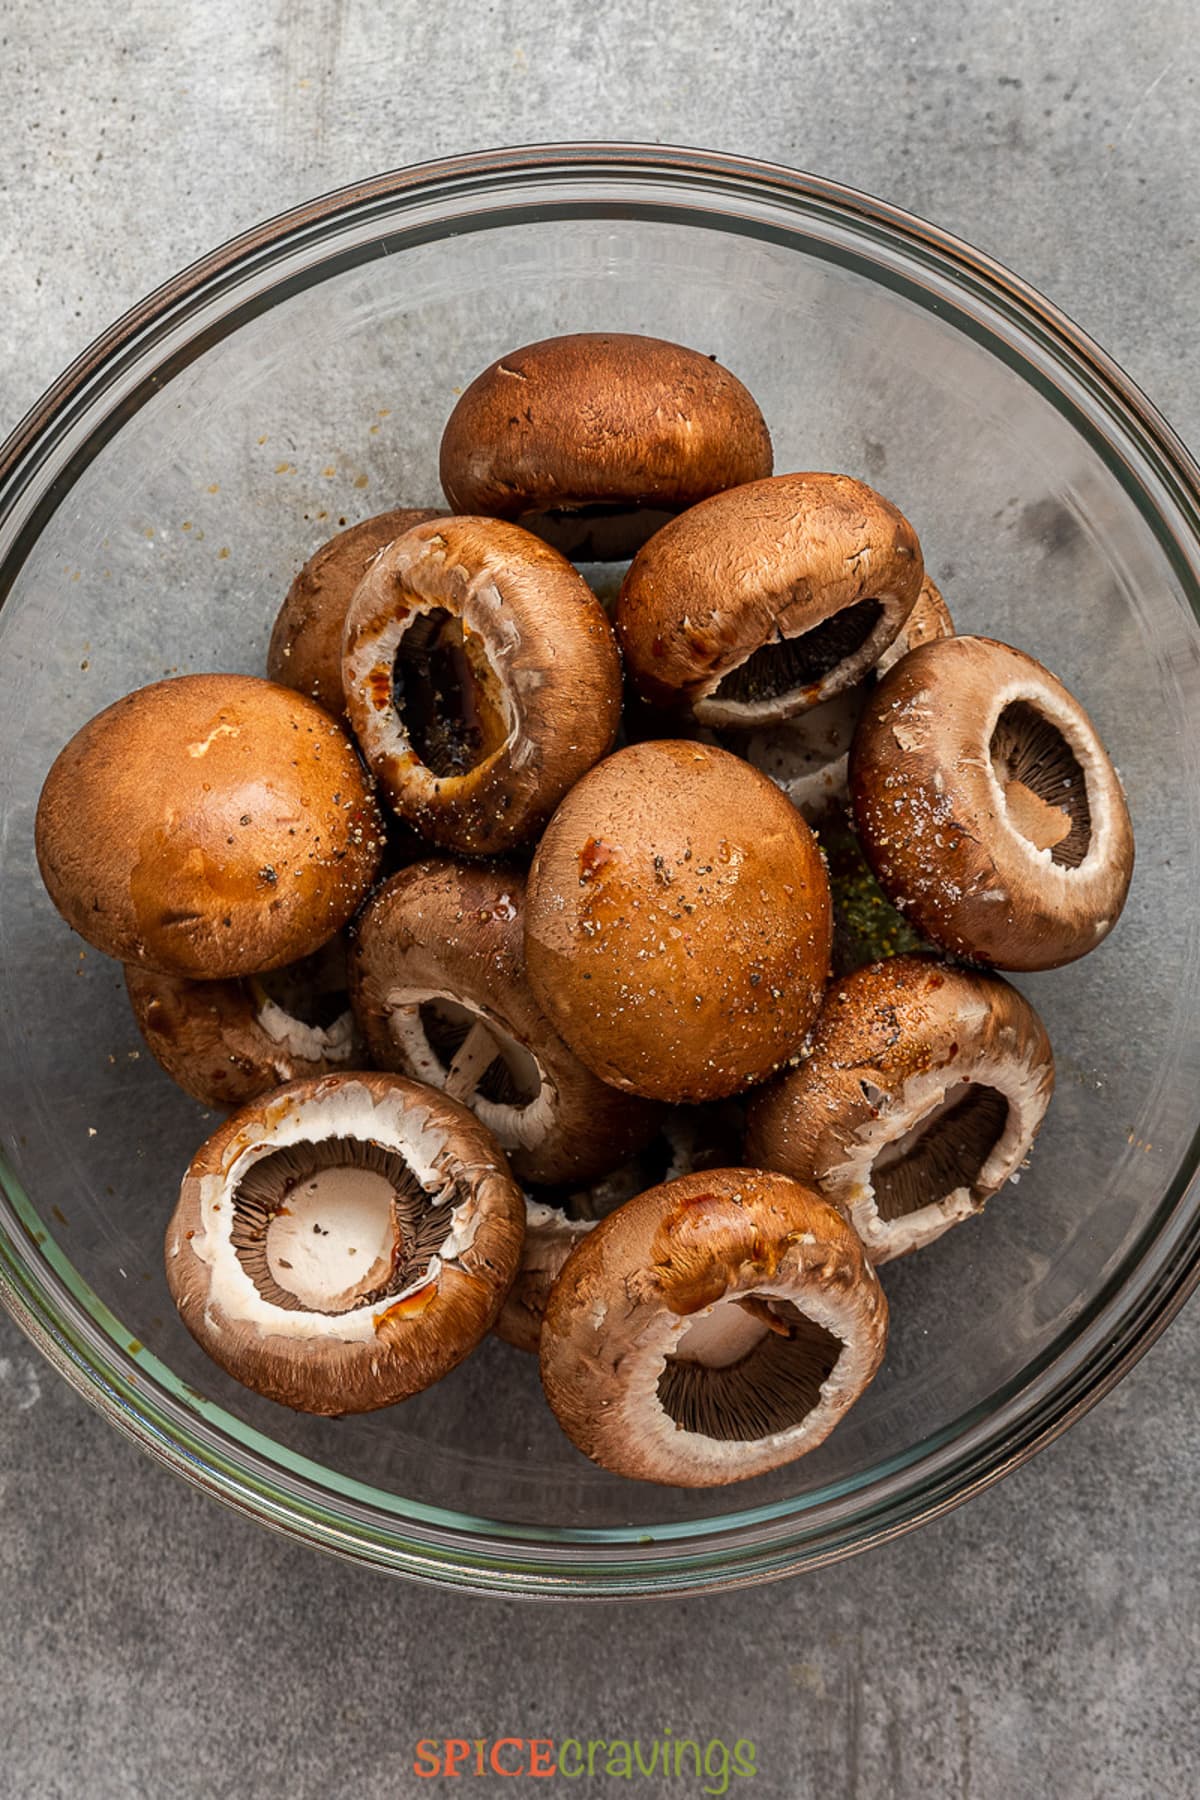 stemmed and clean mushrooms in glass bowl seasoned with salt and pepper.